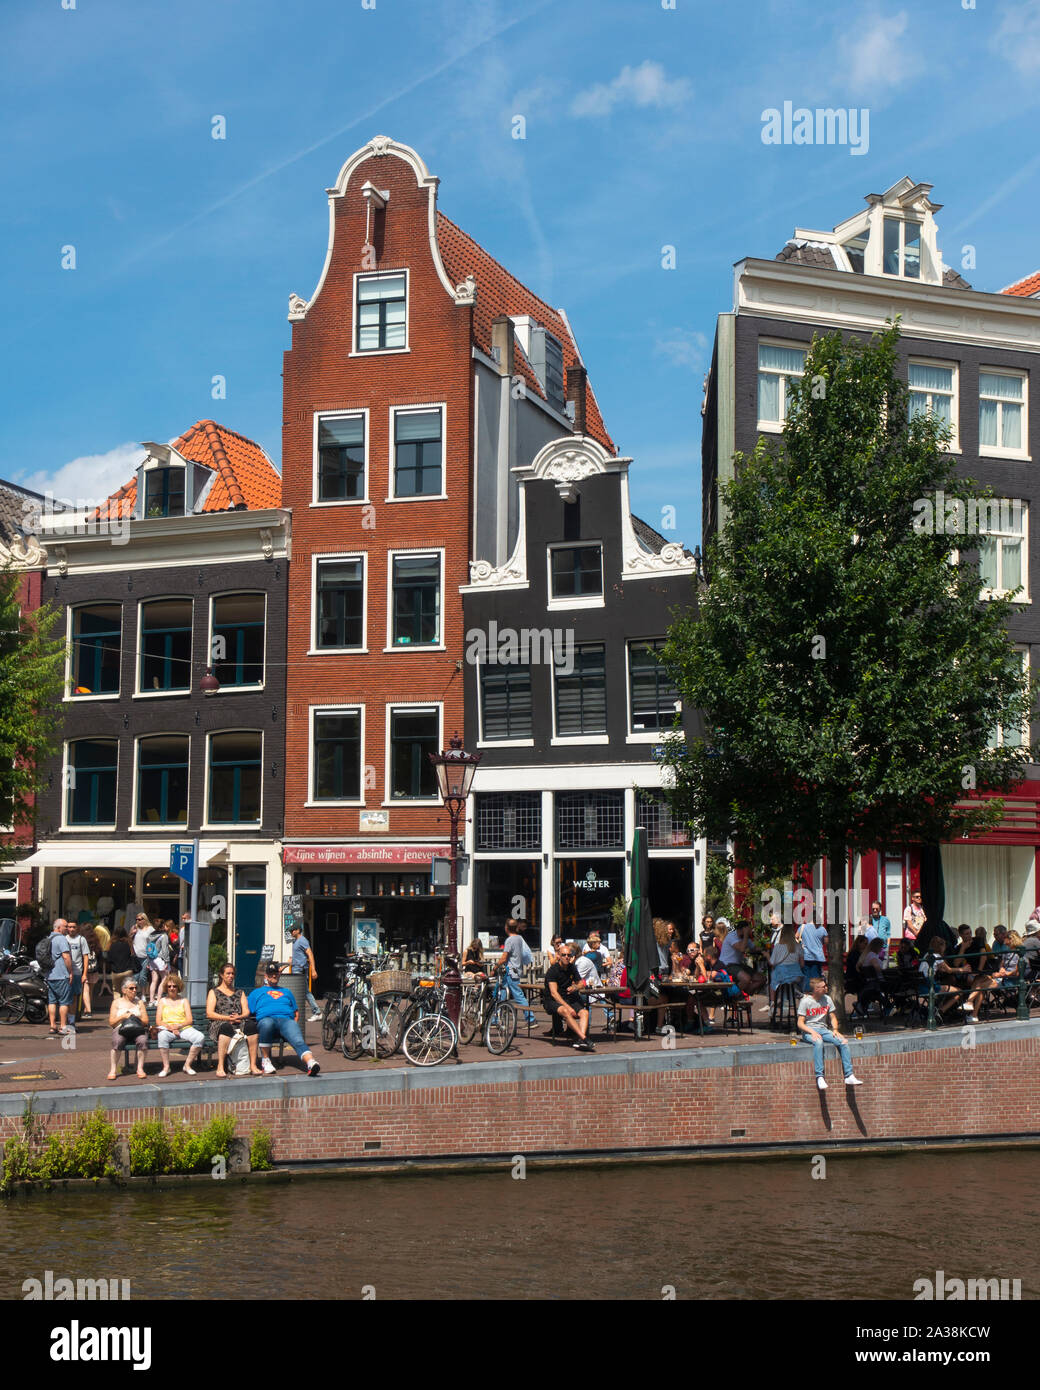 People relaxing along the canals of Amsterdam, Netherlands, Europe Stock Photo